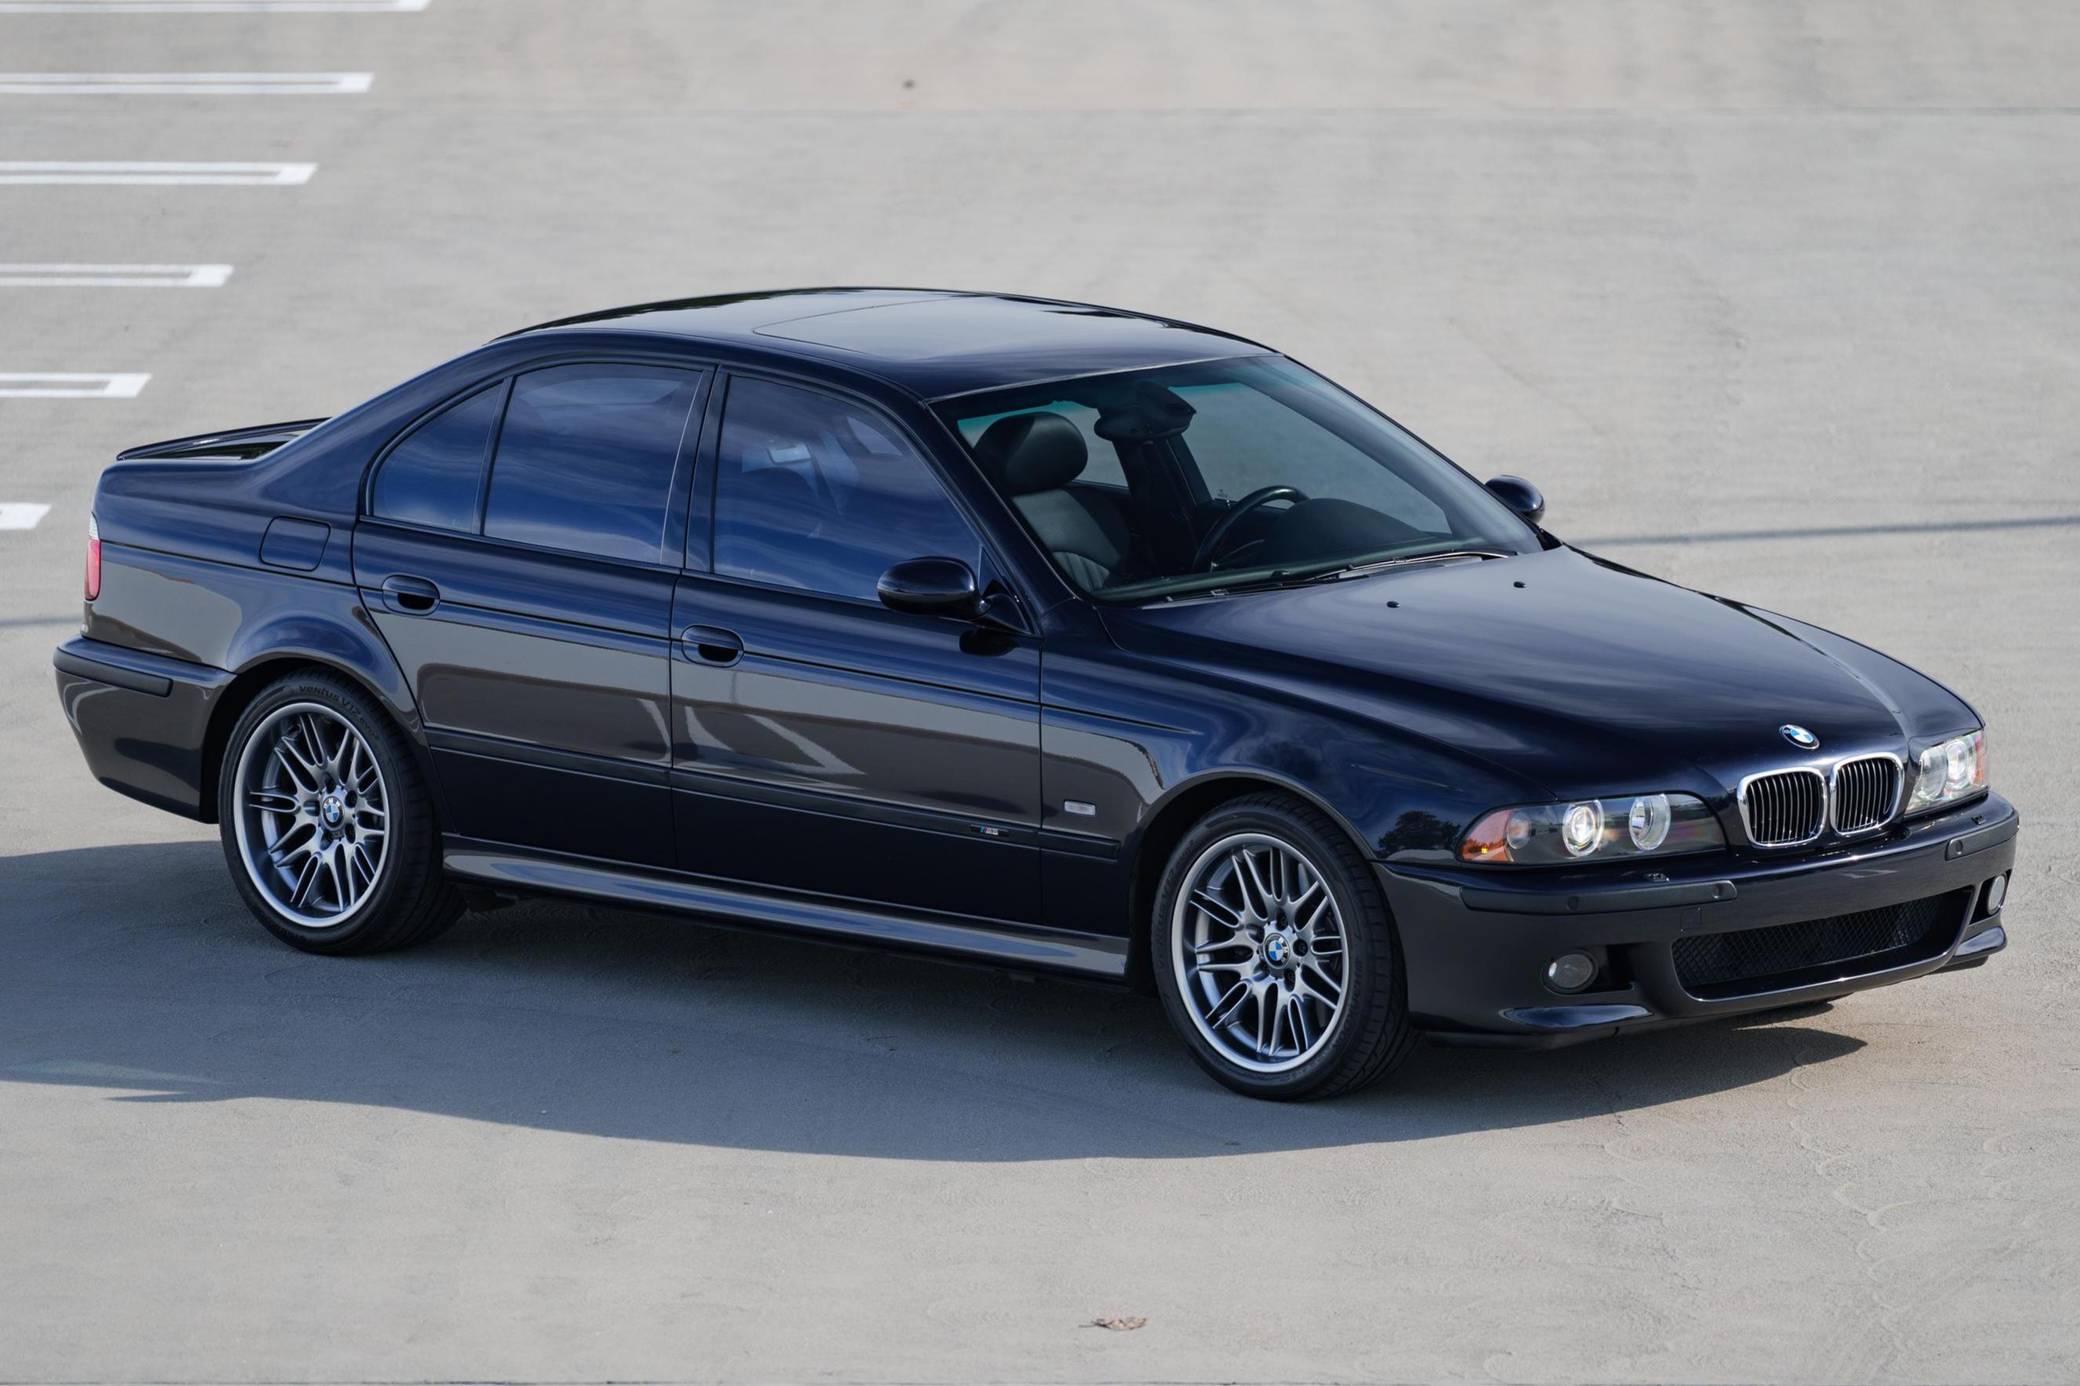 VIDEO: Doug DeMuro Looks at the Nicest E39 BMW M5 We've Ever Seen